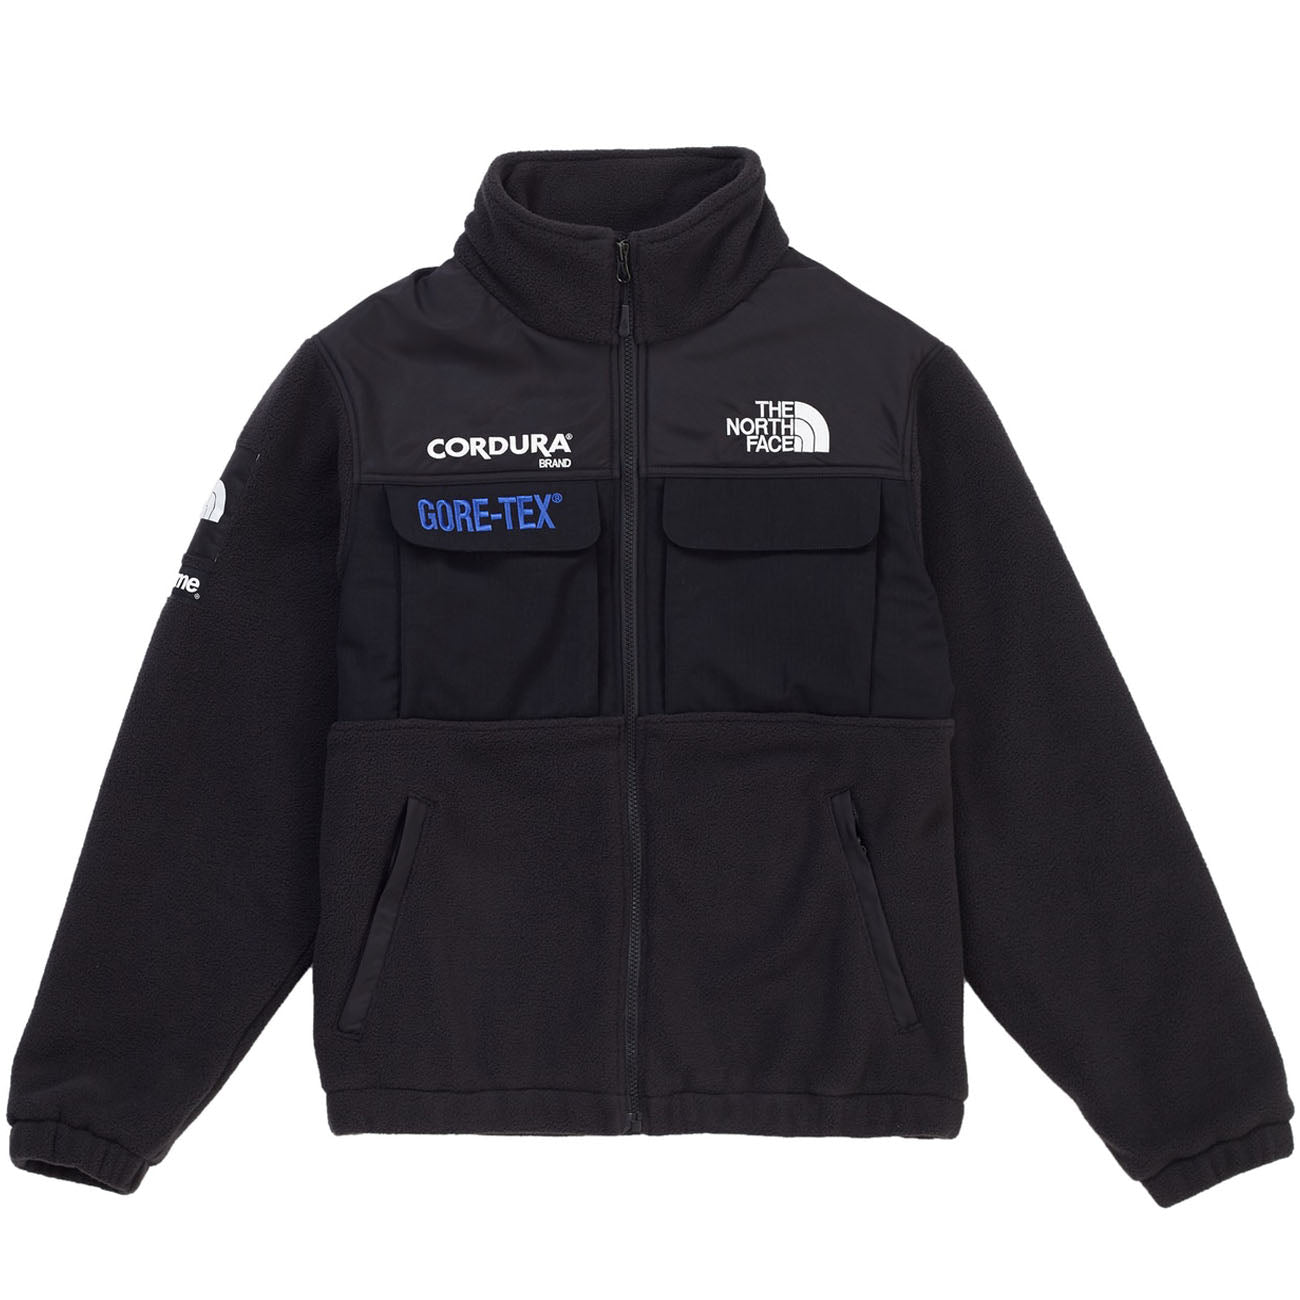 Supreme The North Face Expedition Fleece (FW18) Jacket- Black